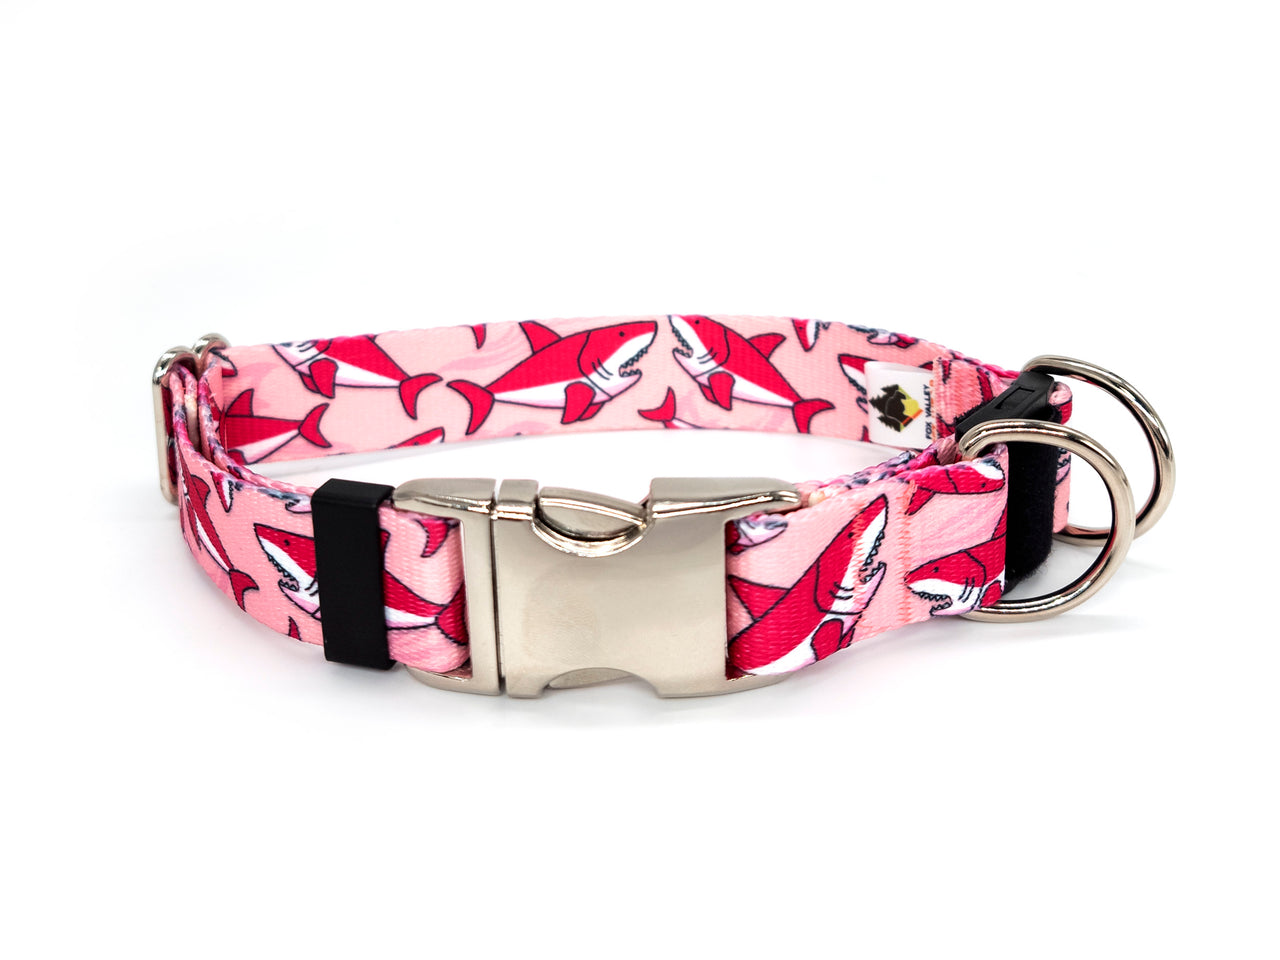 BREAKAWAY Personalized Blue or Pink "Sharks" Patterned Collar